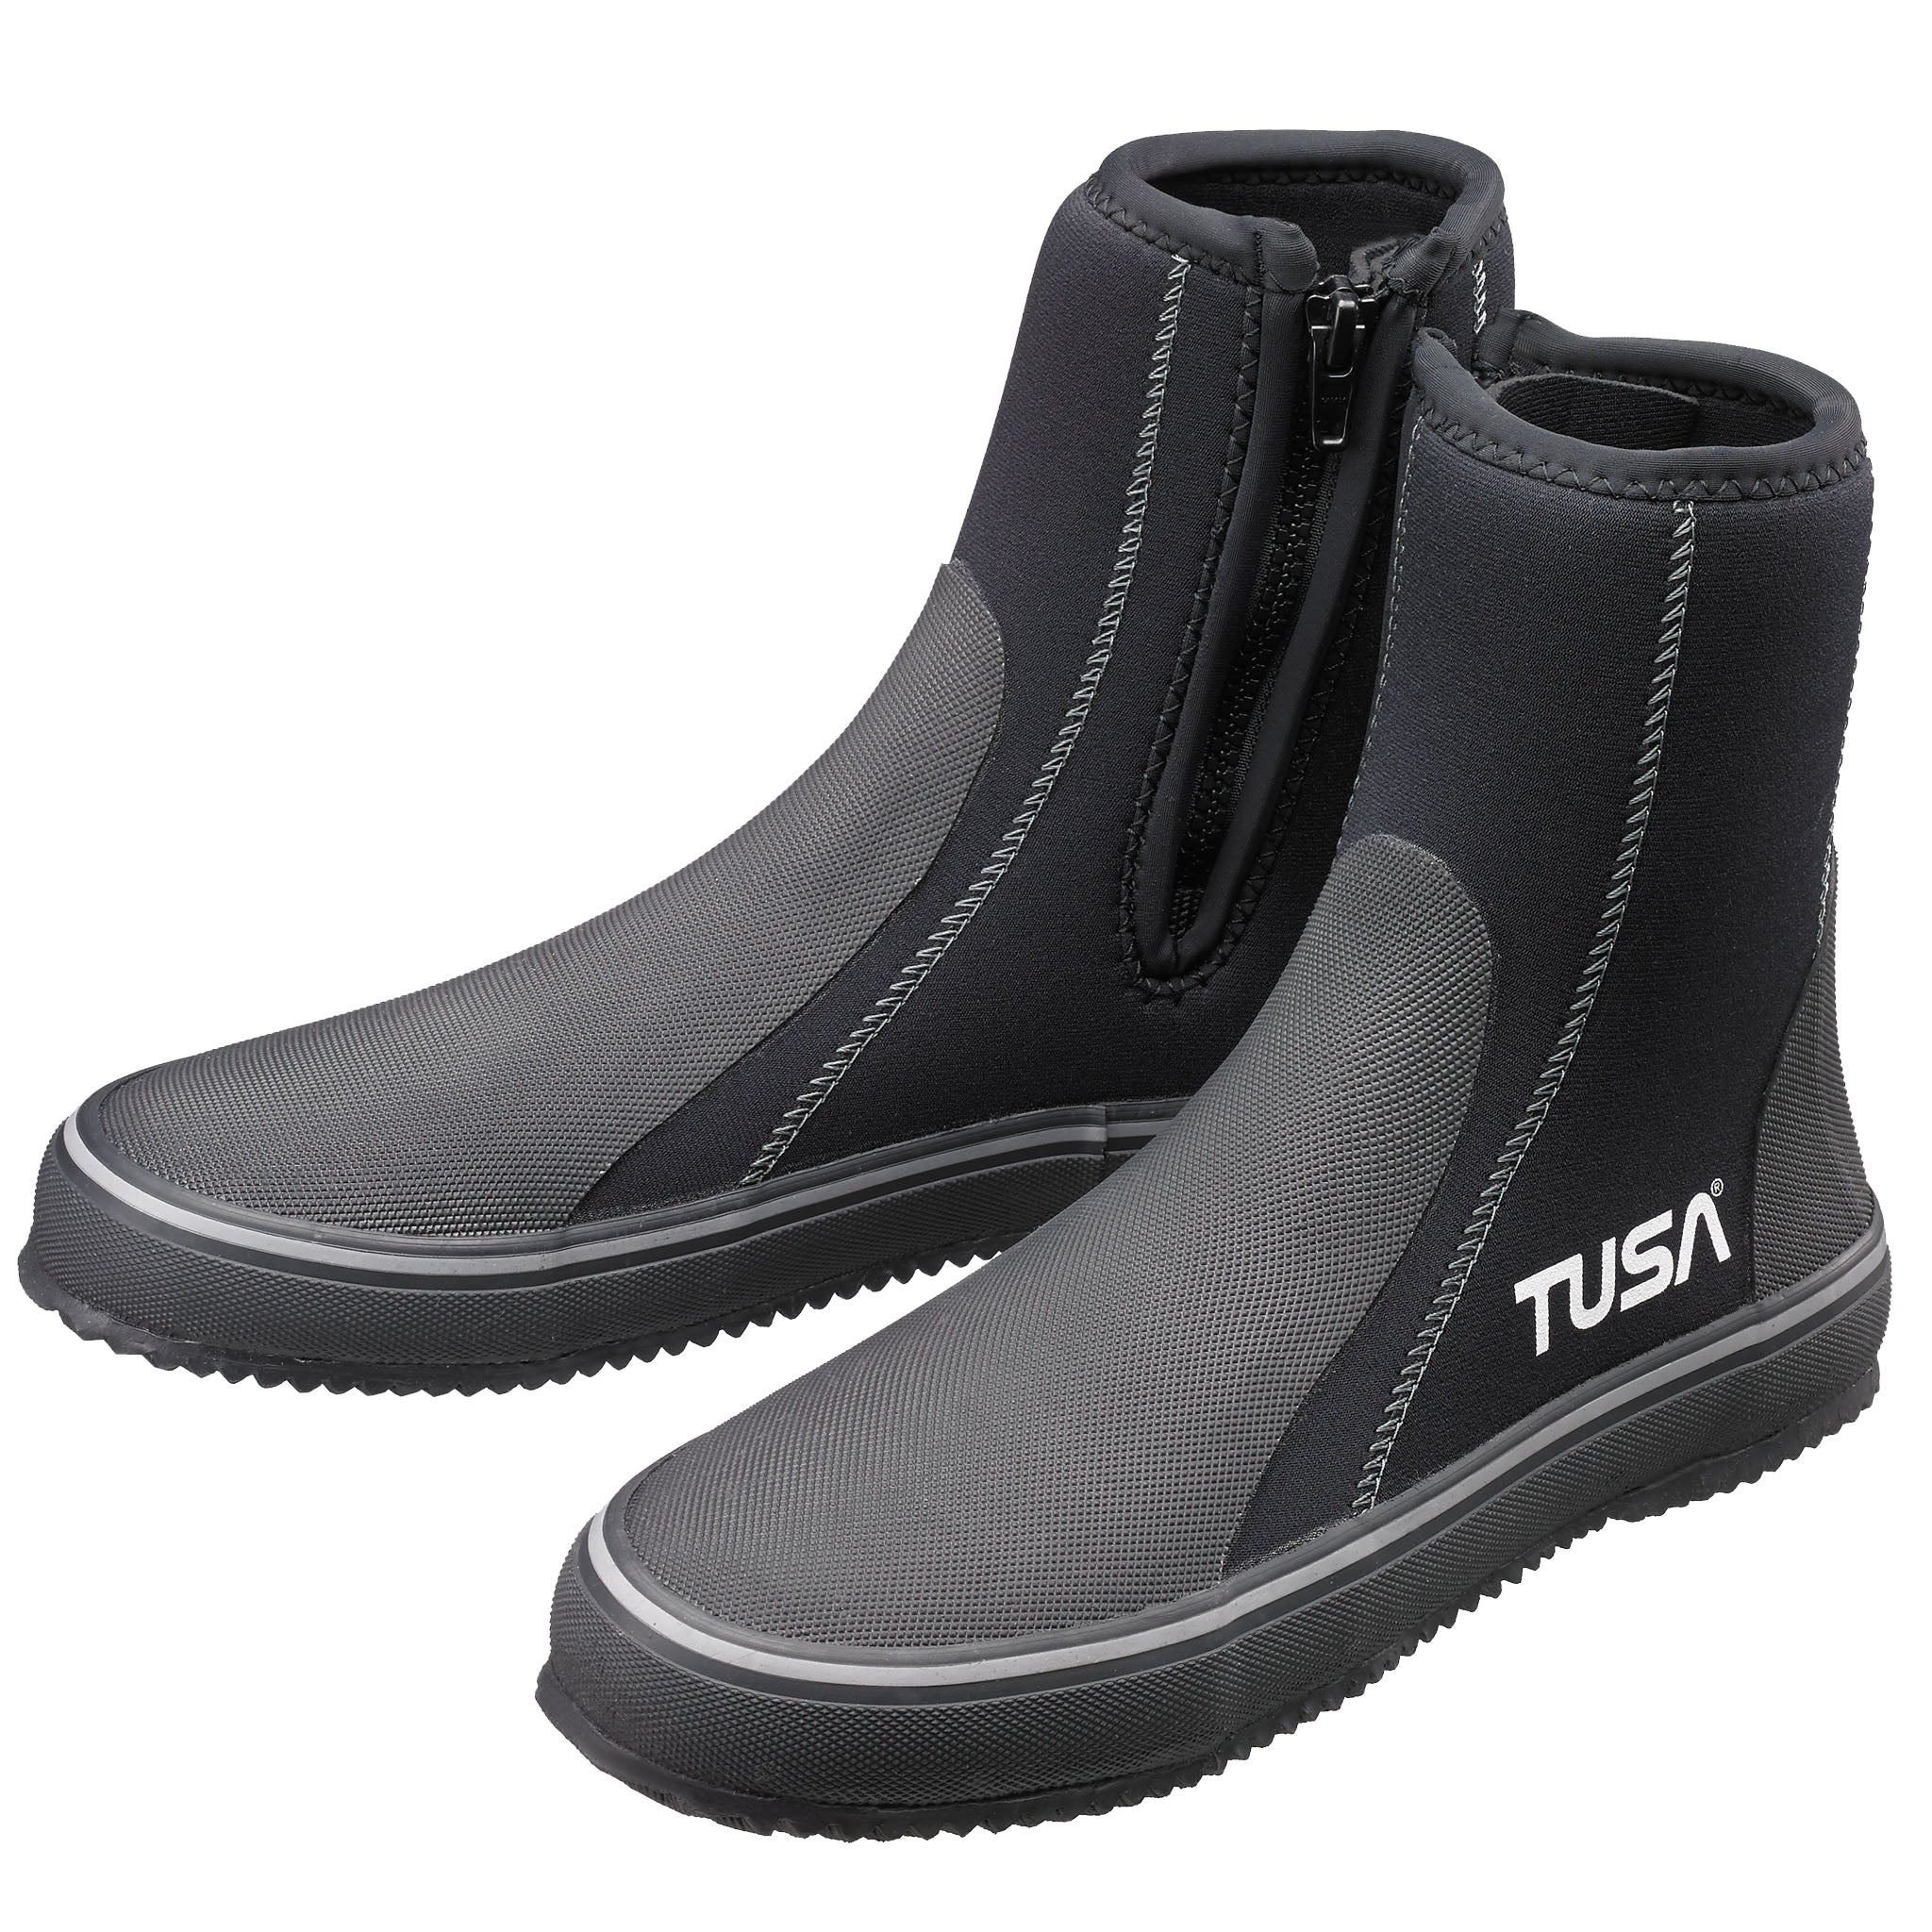 Tusa 5mm Zipped Wetsuit Dive Boots